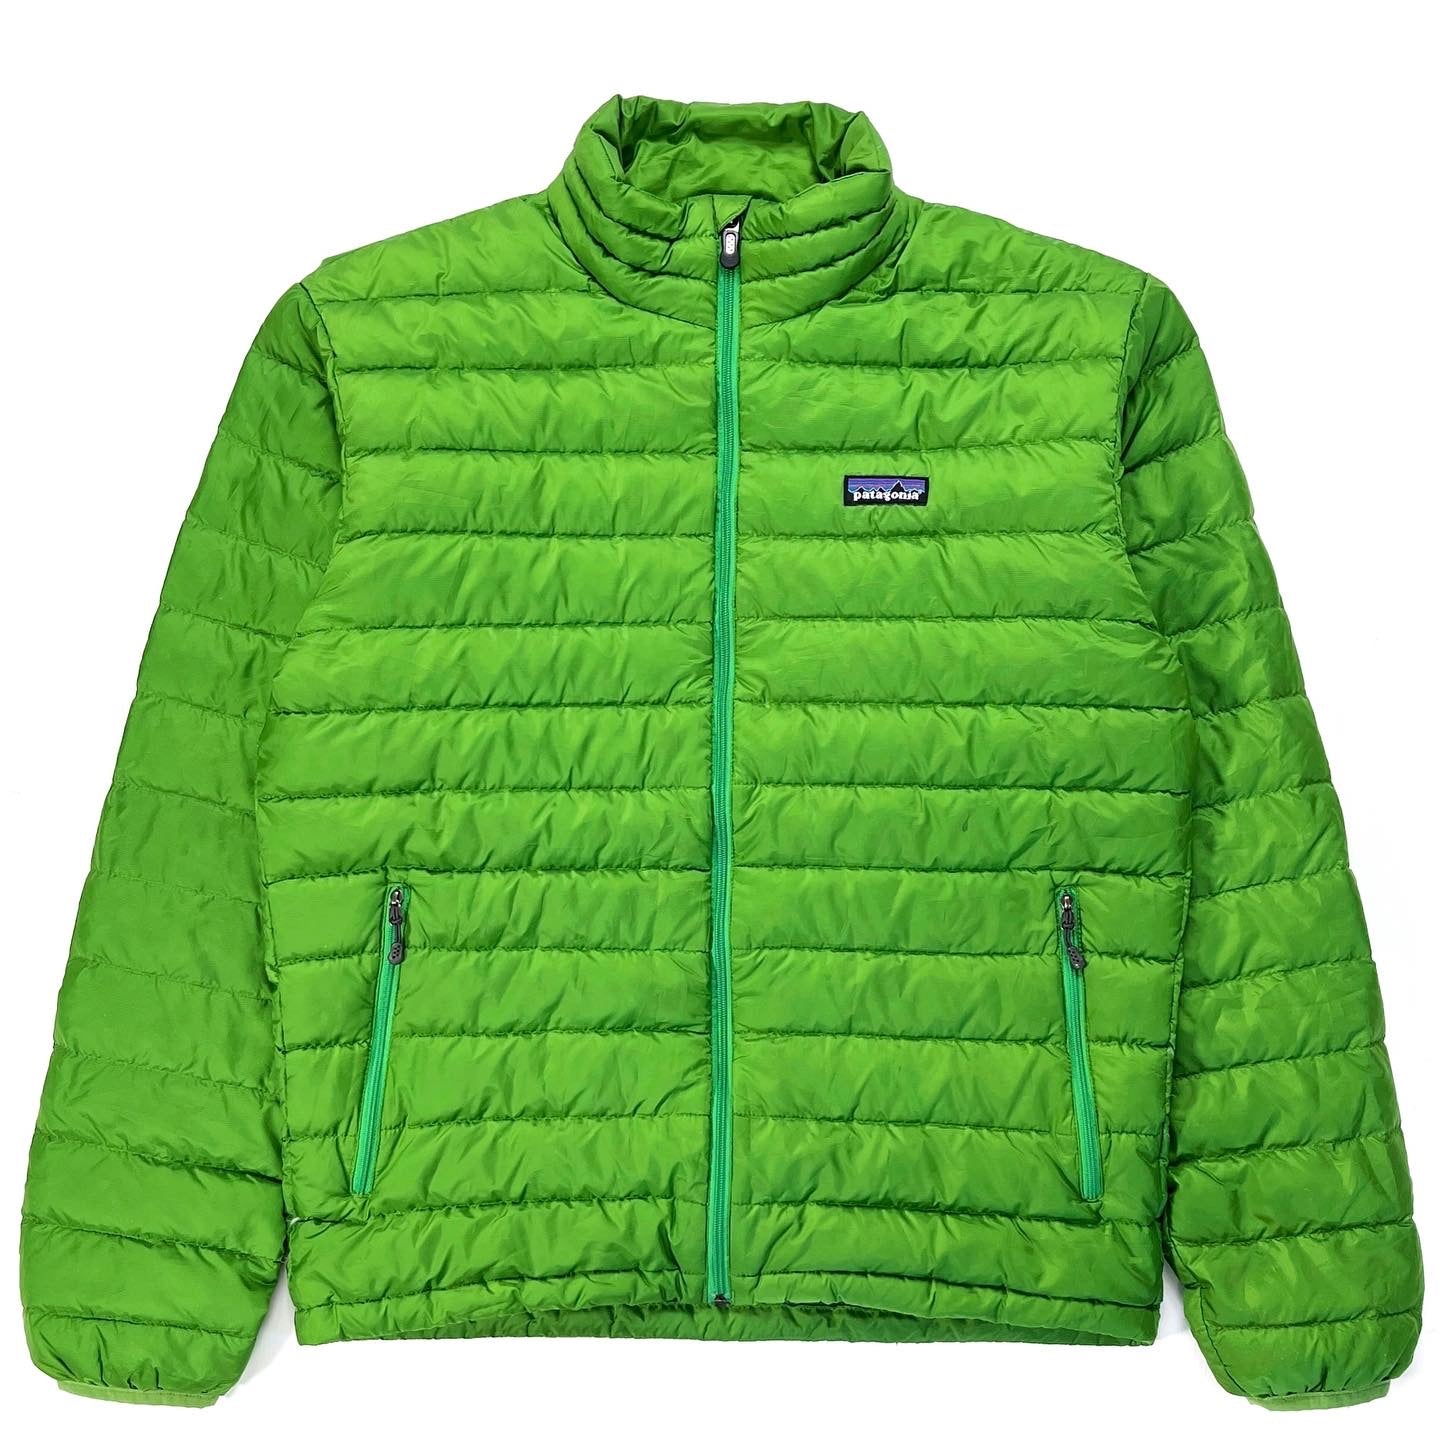 2011 Patagonia Mens Ultralight Down Jacket, Fennel (S/M)